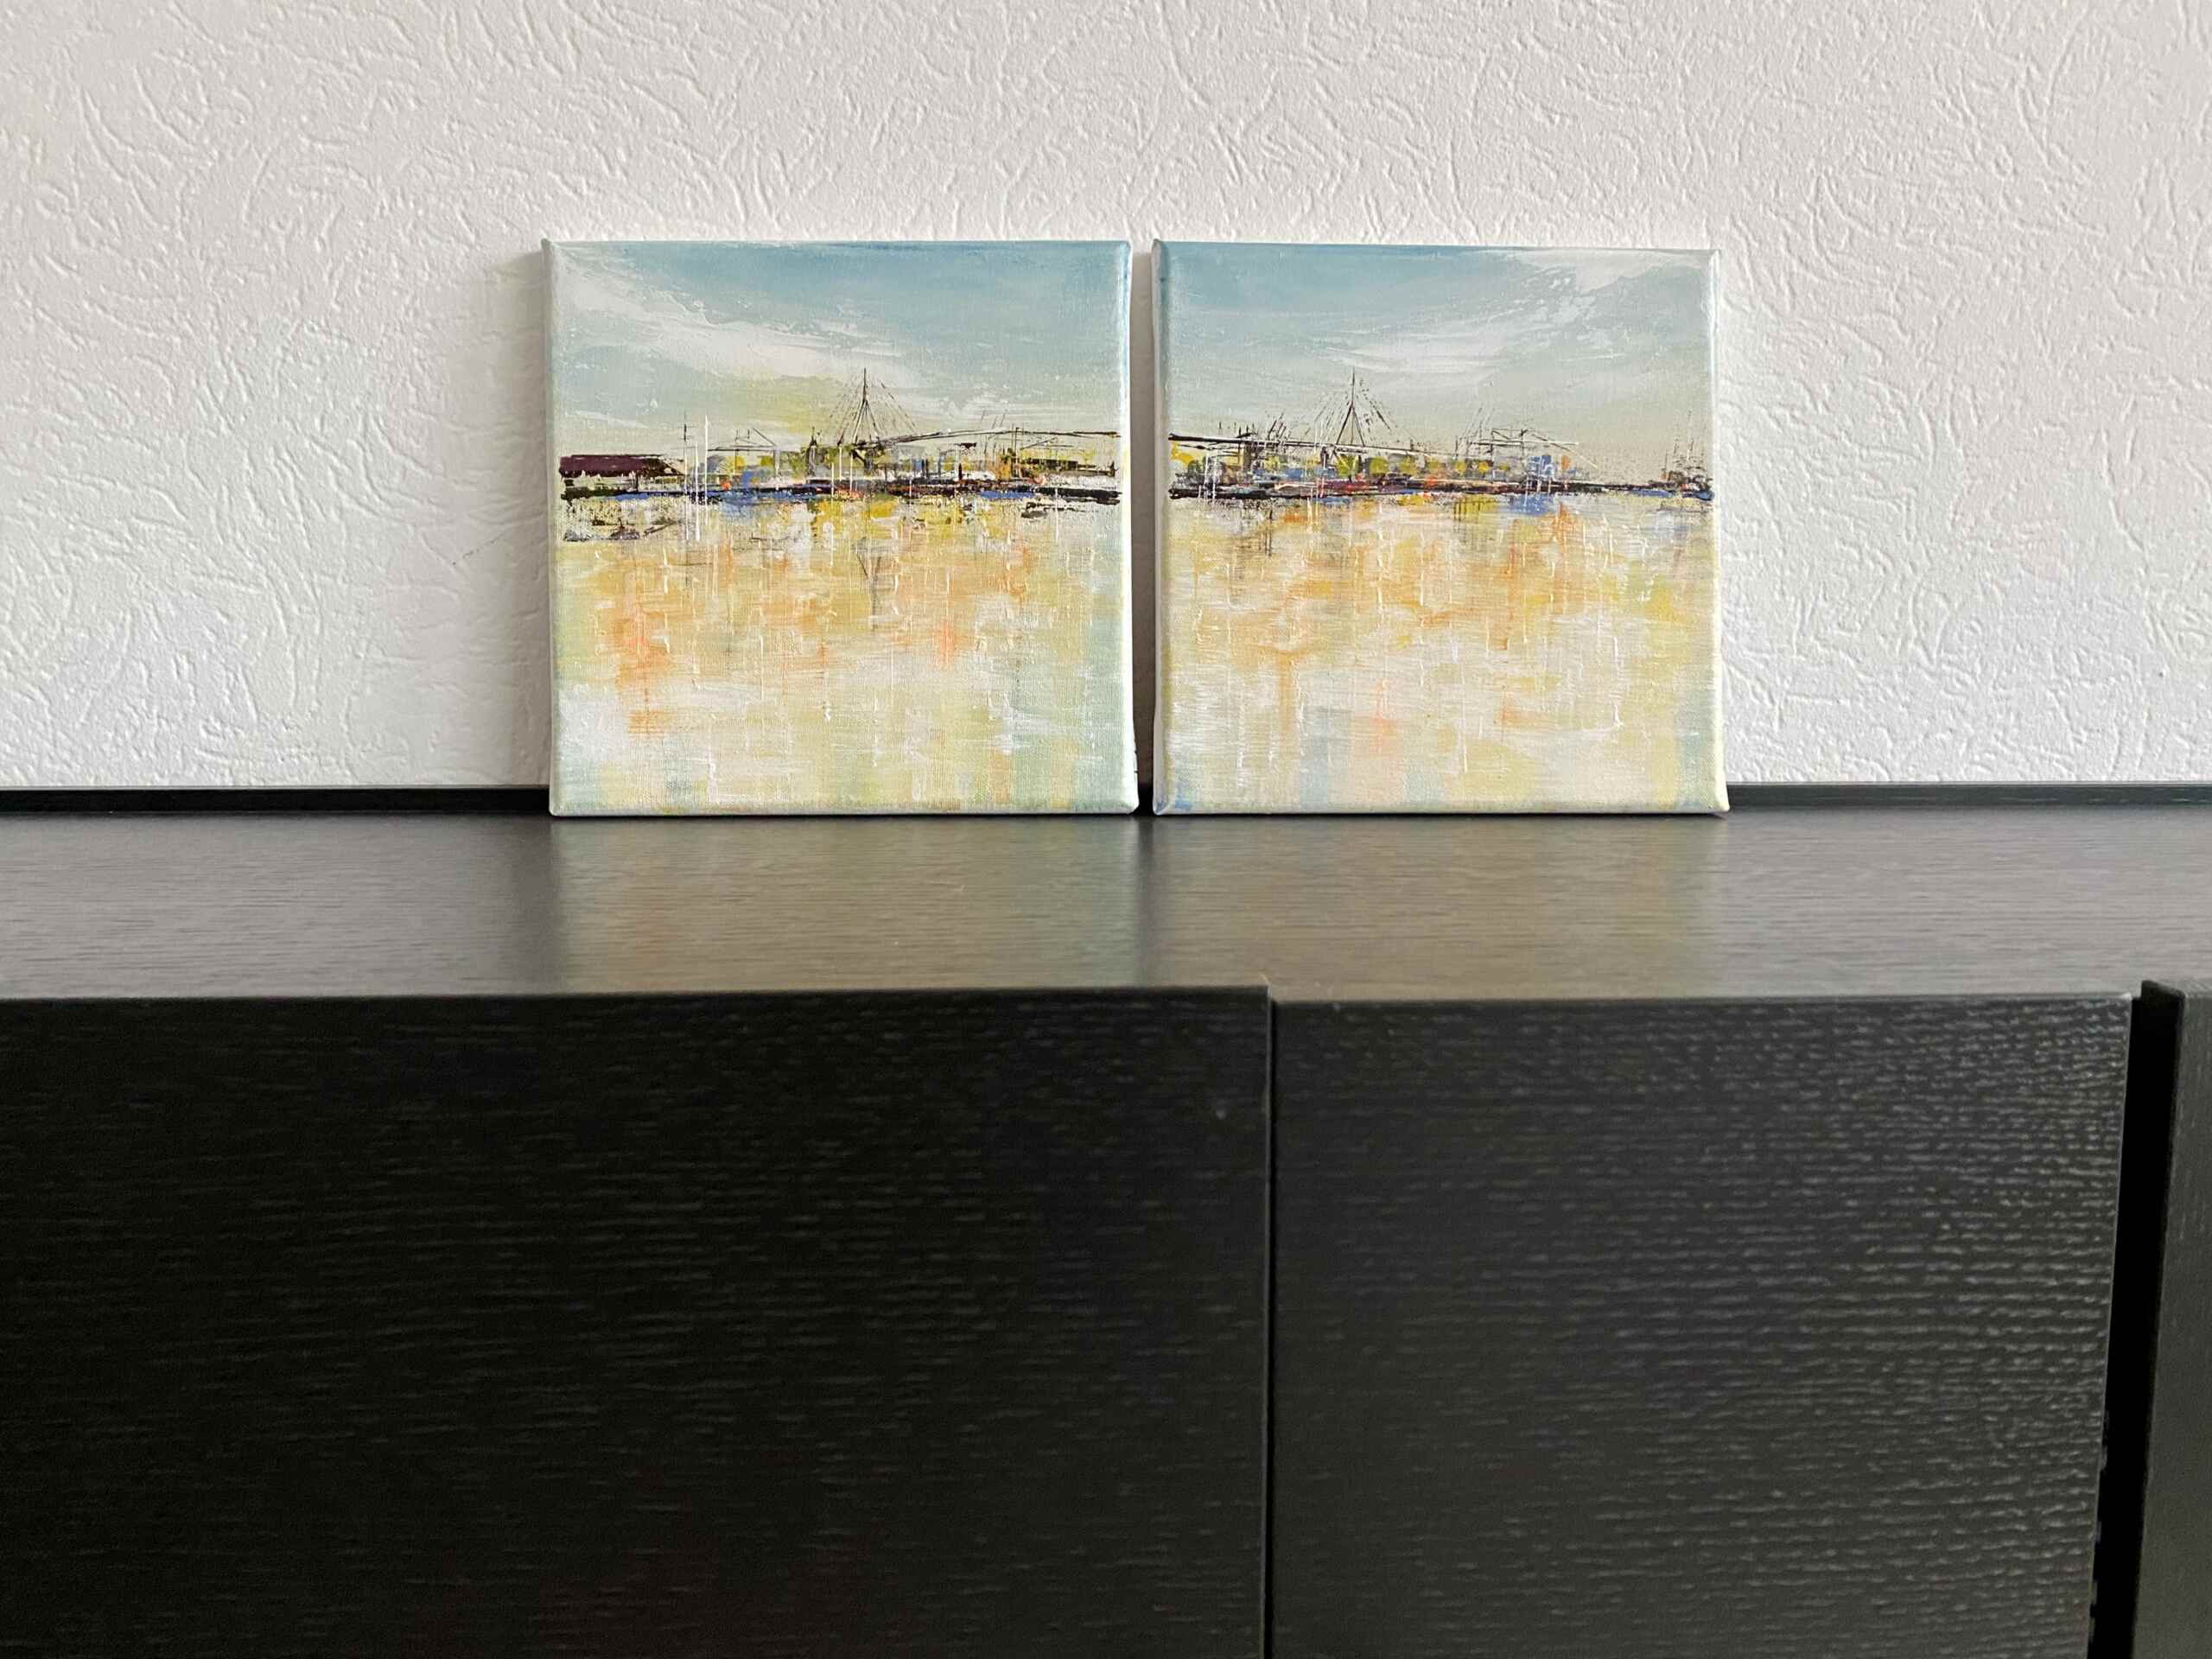 Artworks "A New Day 1 & 2" by Nina Groth